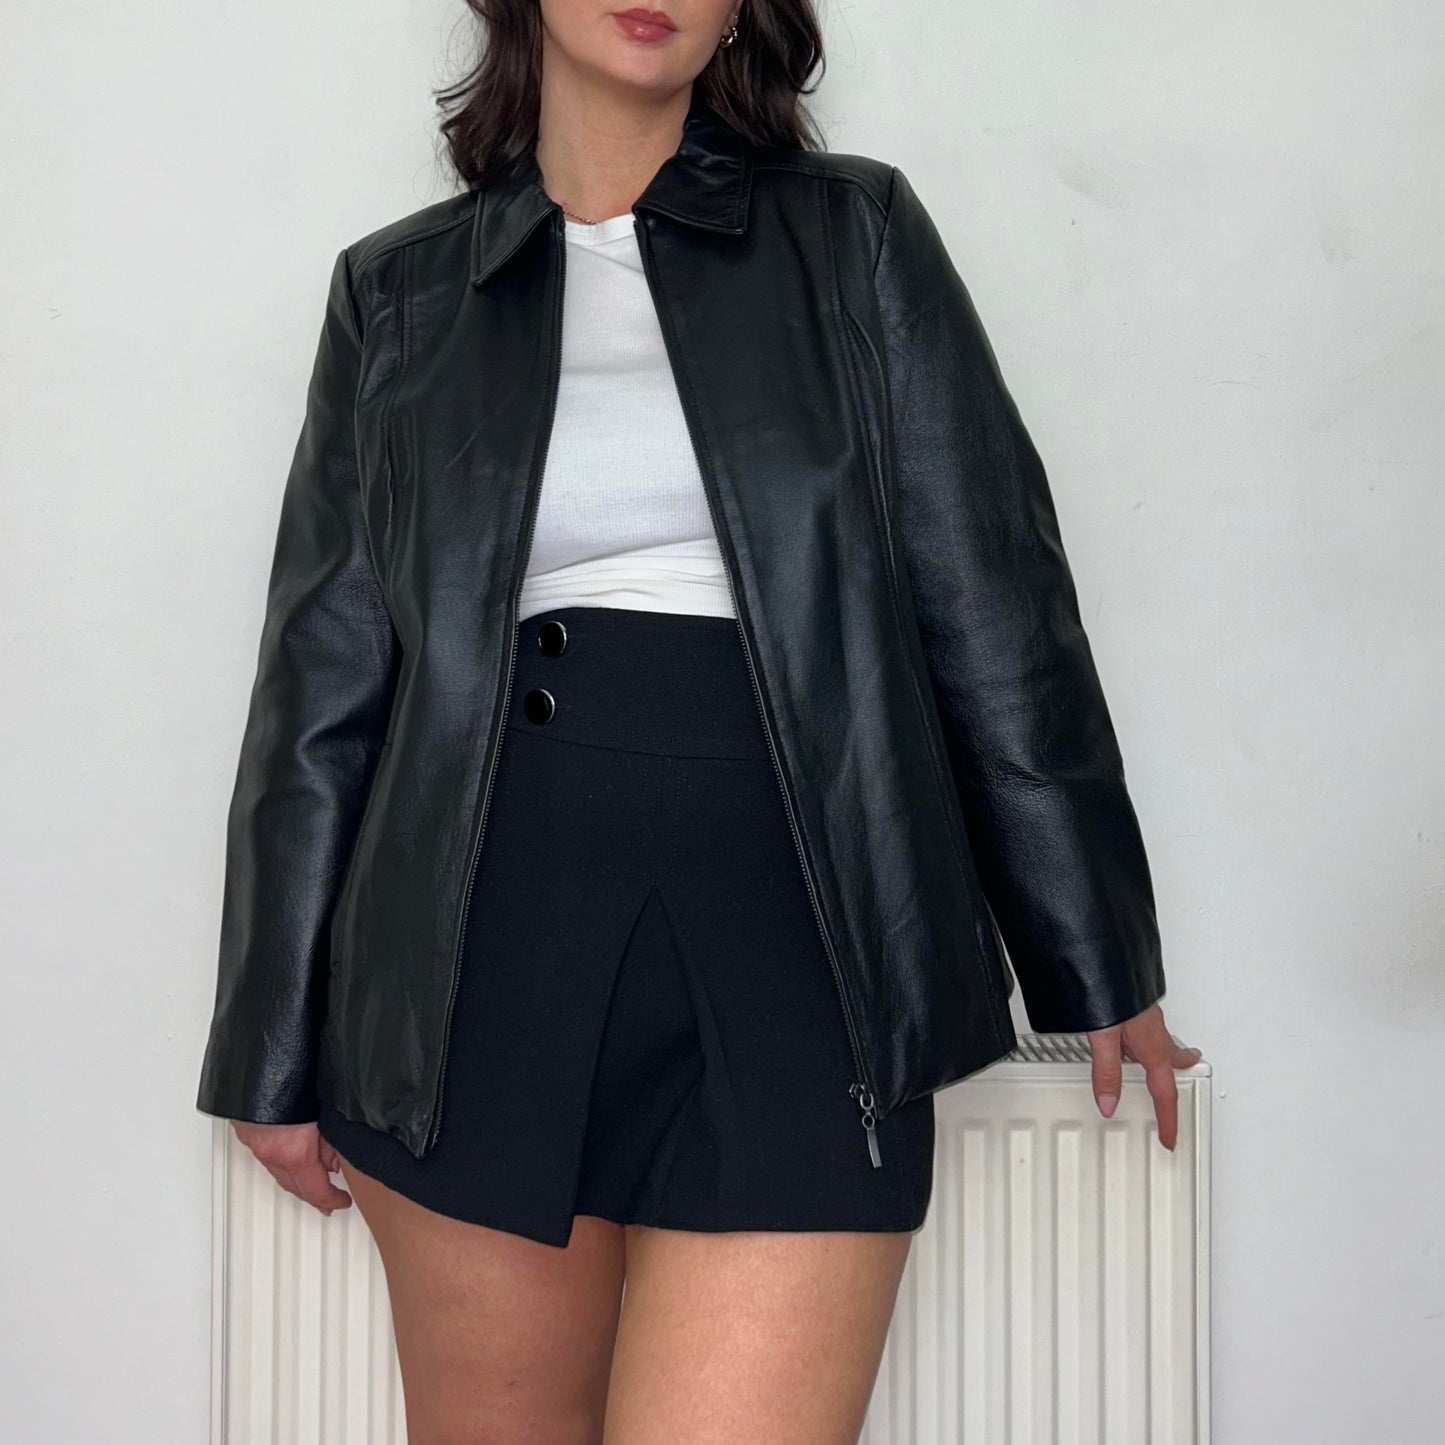 close up of model wearing a black leather bomber jacket with a white top and black skirt